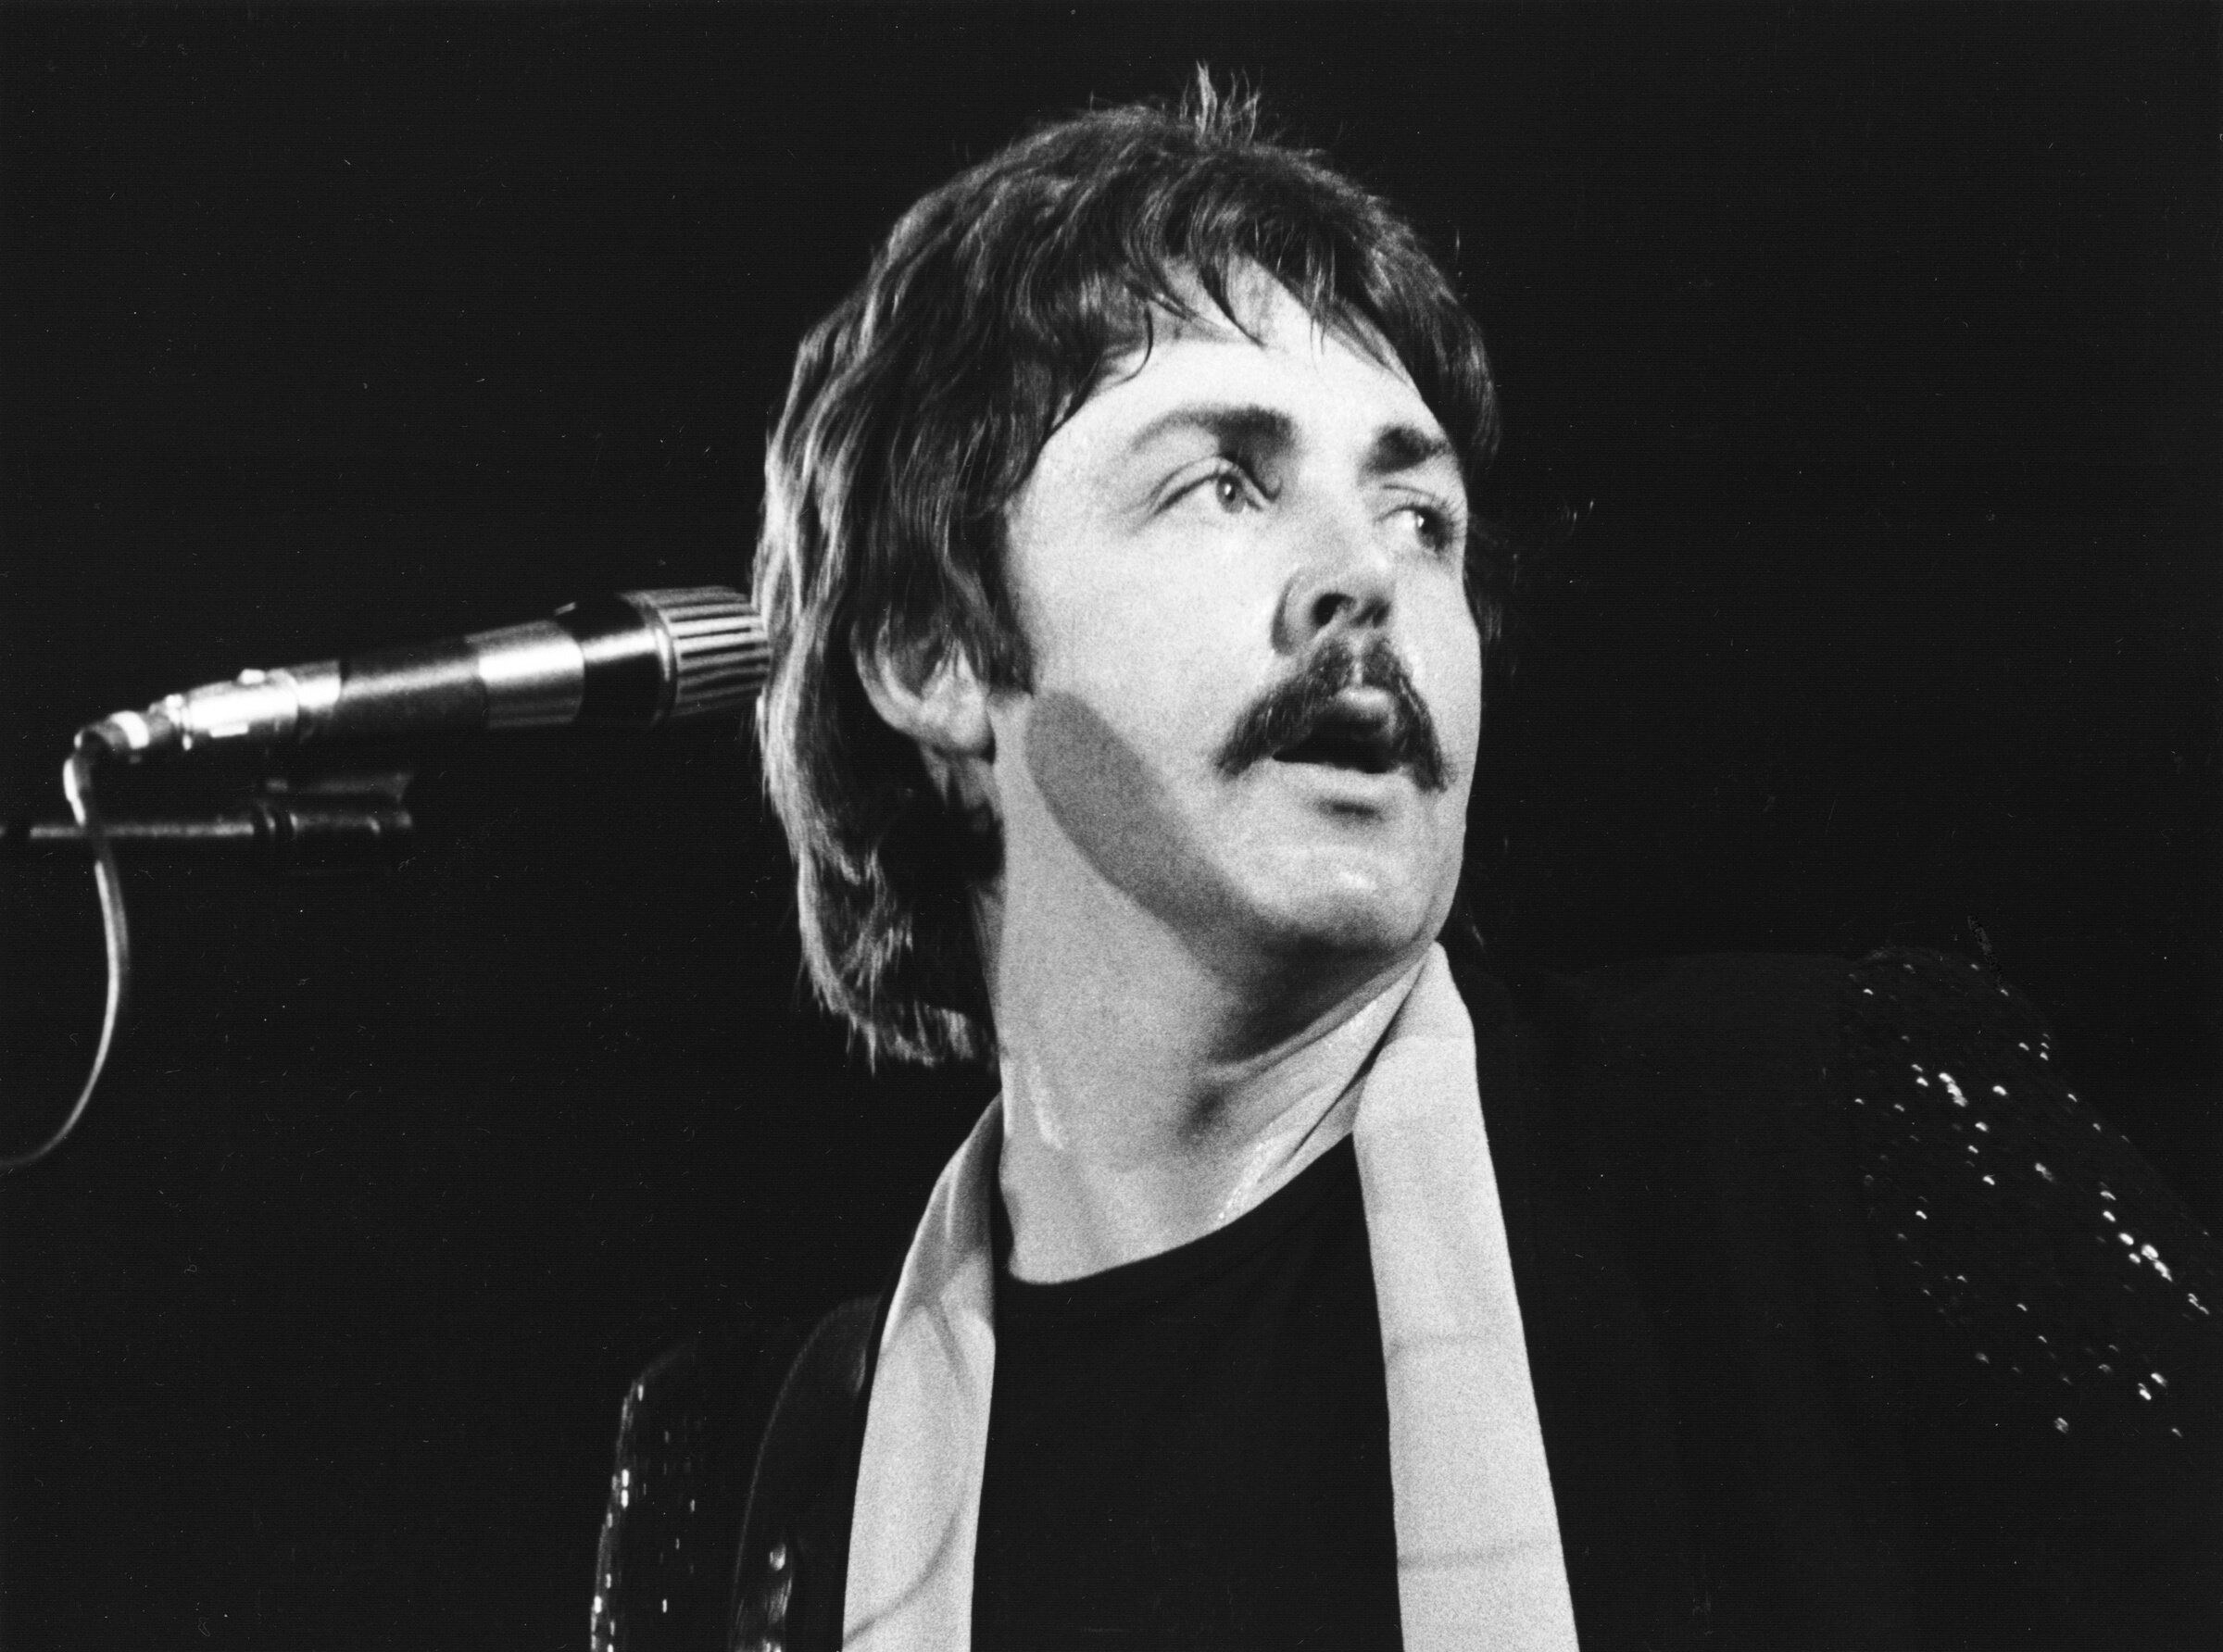 Paul McCartney, writer of Badfinger's "Come and Get It," with a mustache